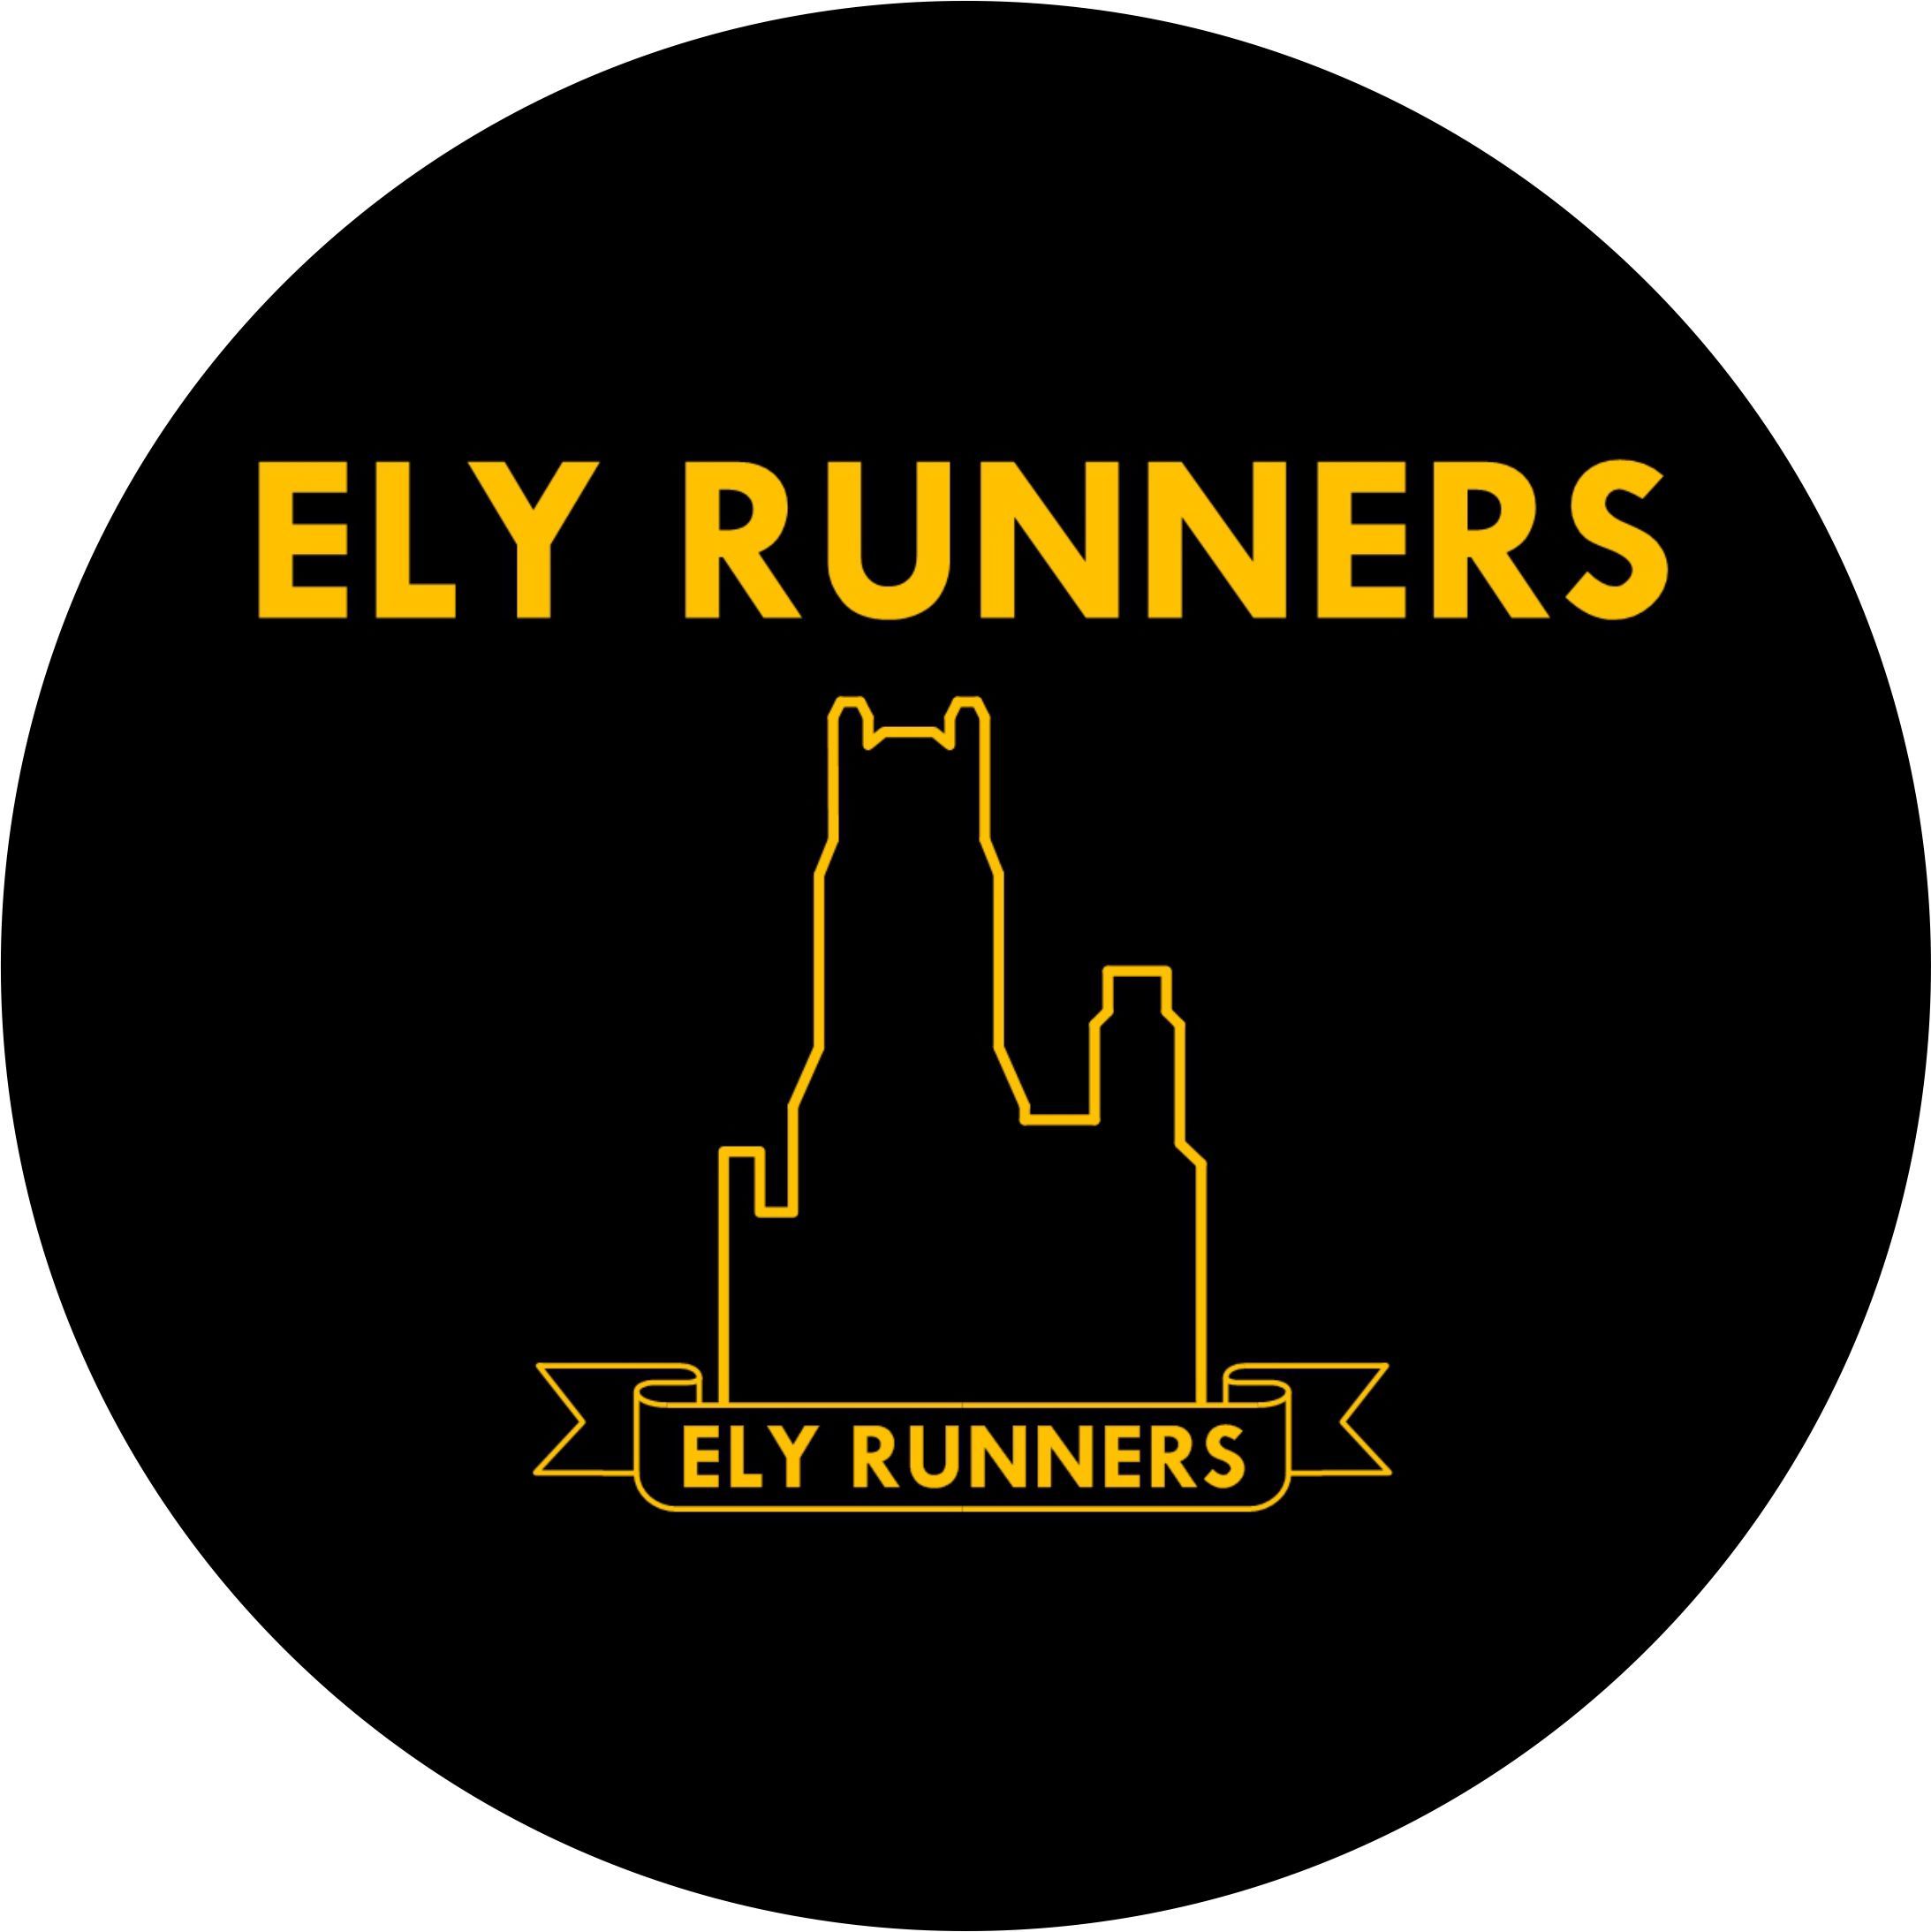 Michelle Berry - Ely Runners